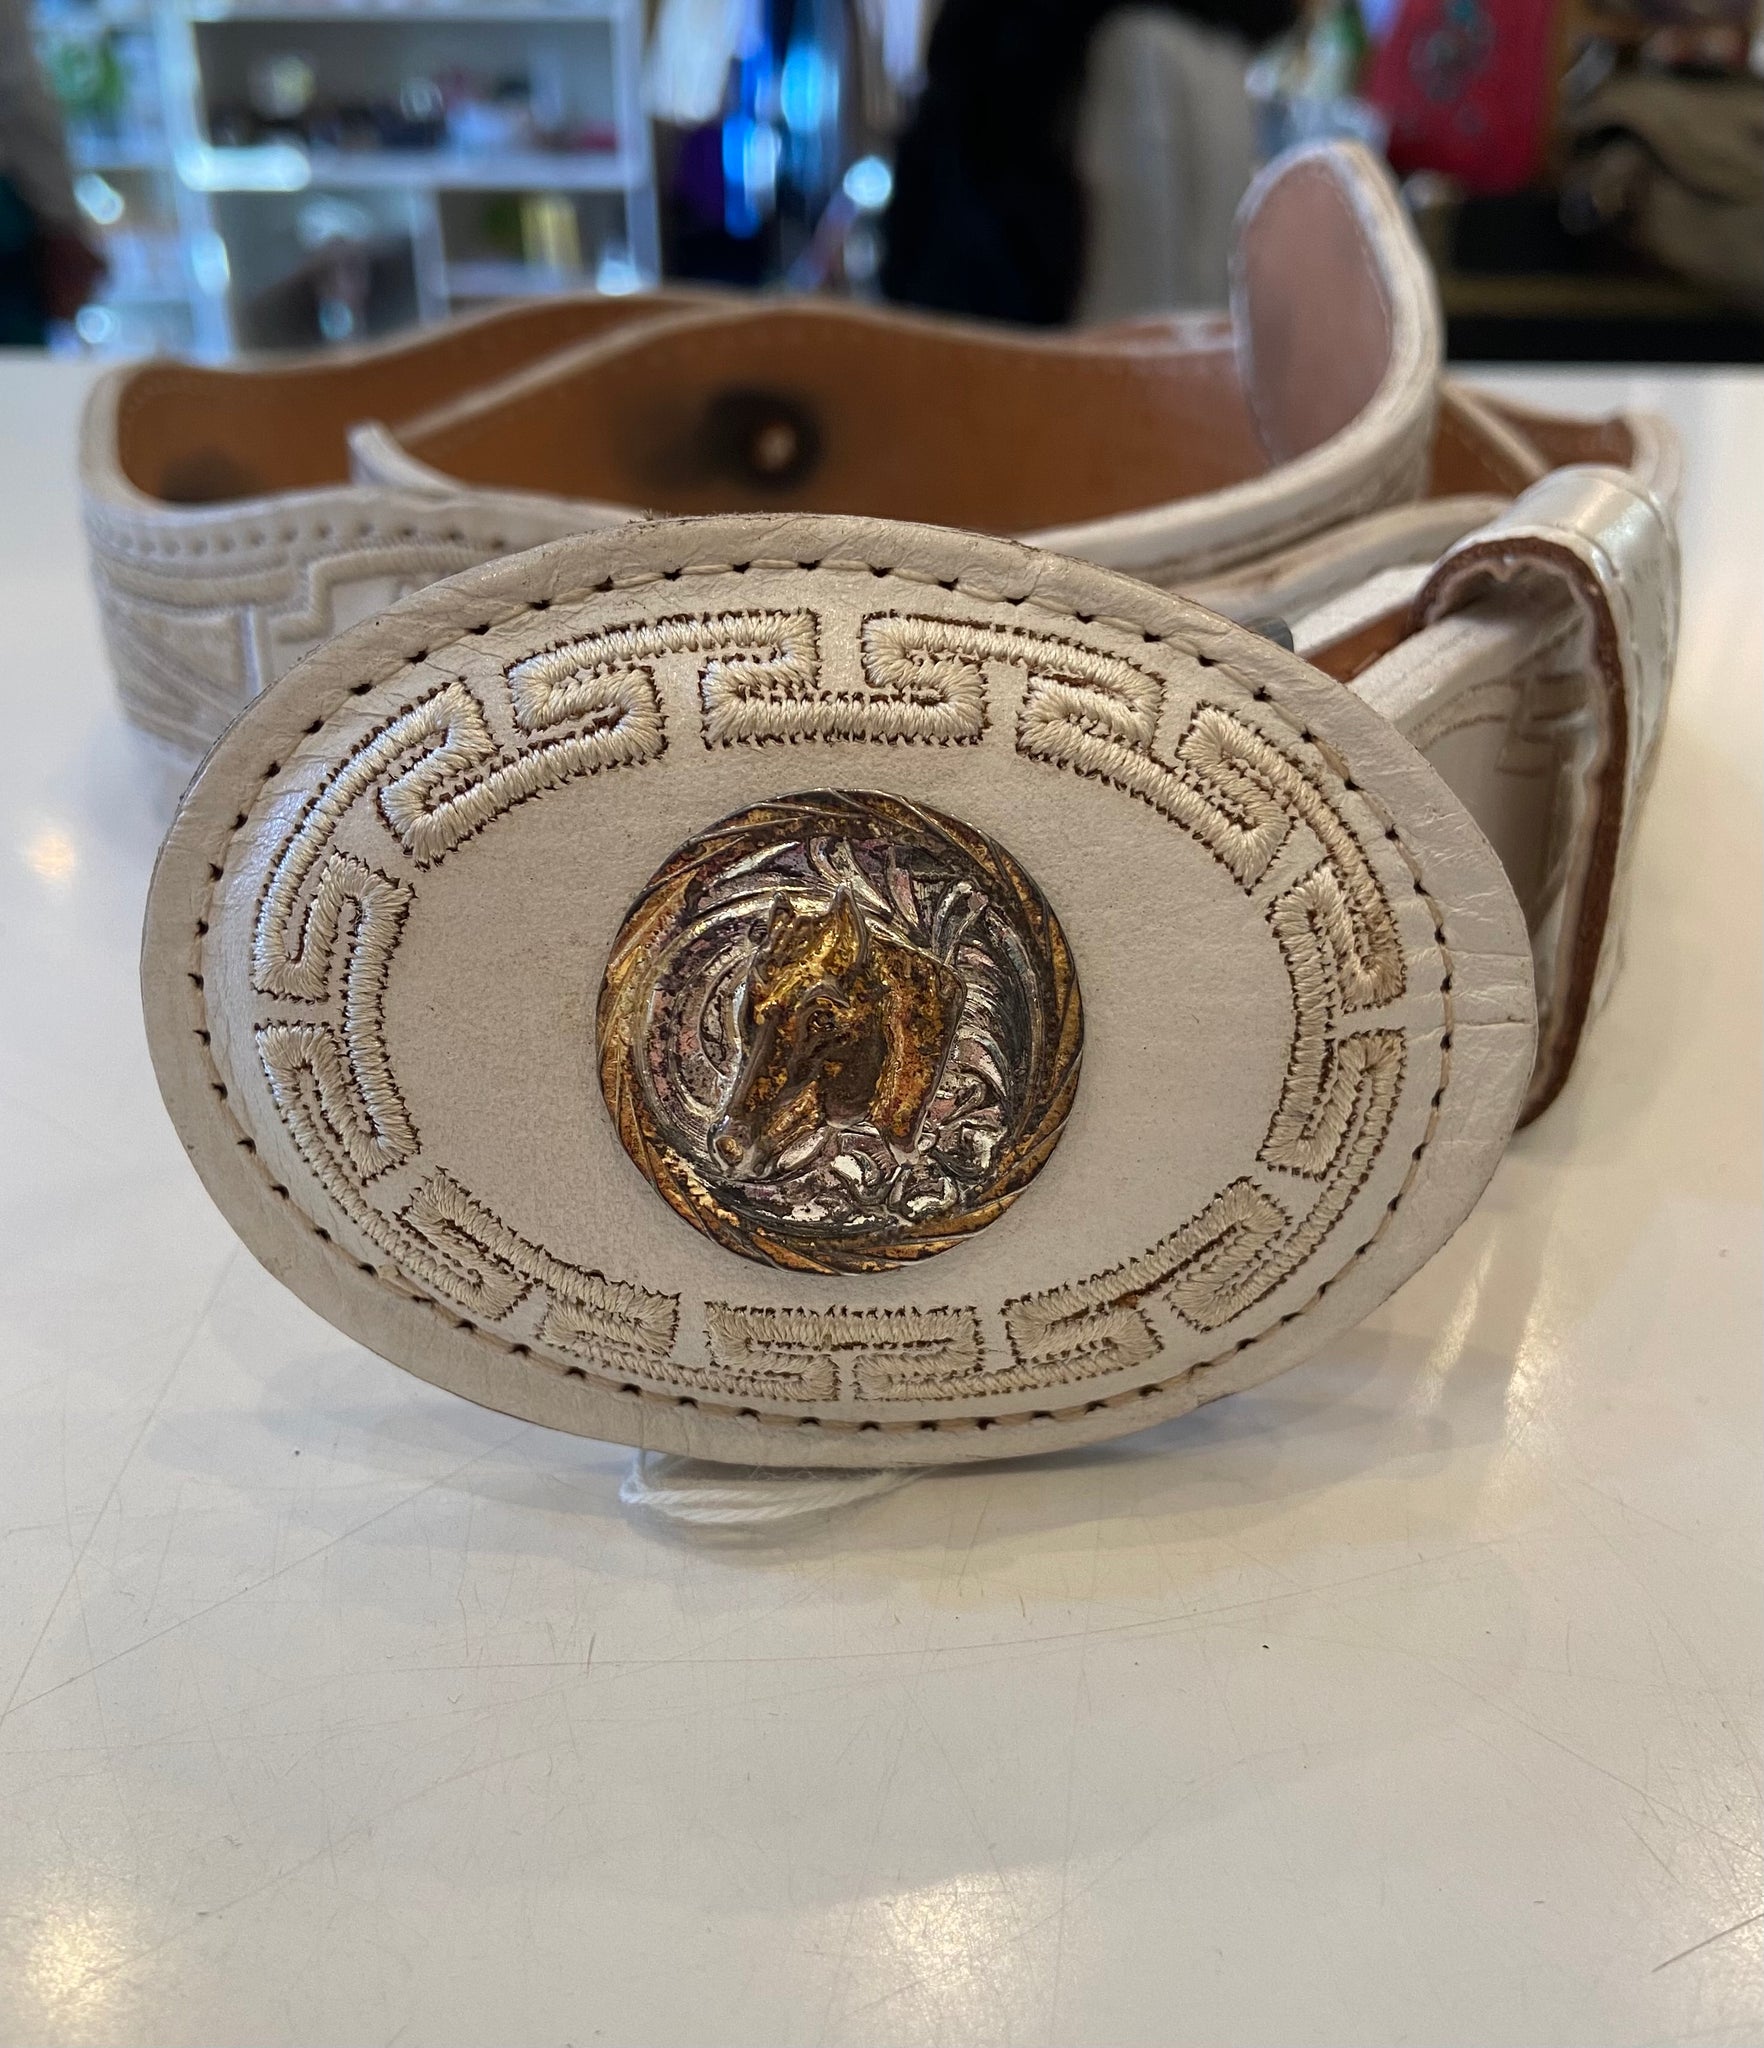 Authentic Versace Belt White Leather Gold Medusa for Sale in